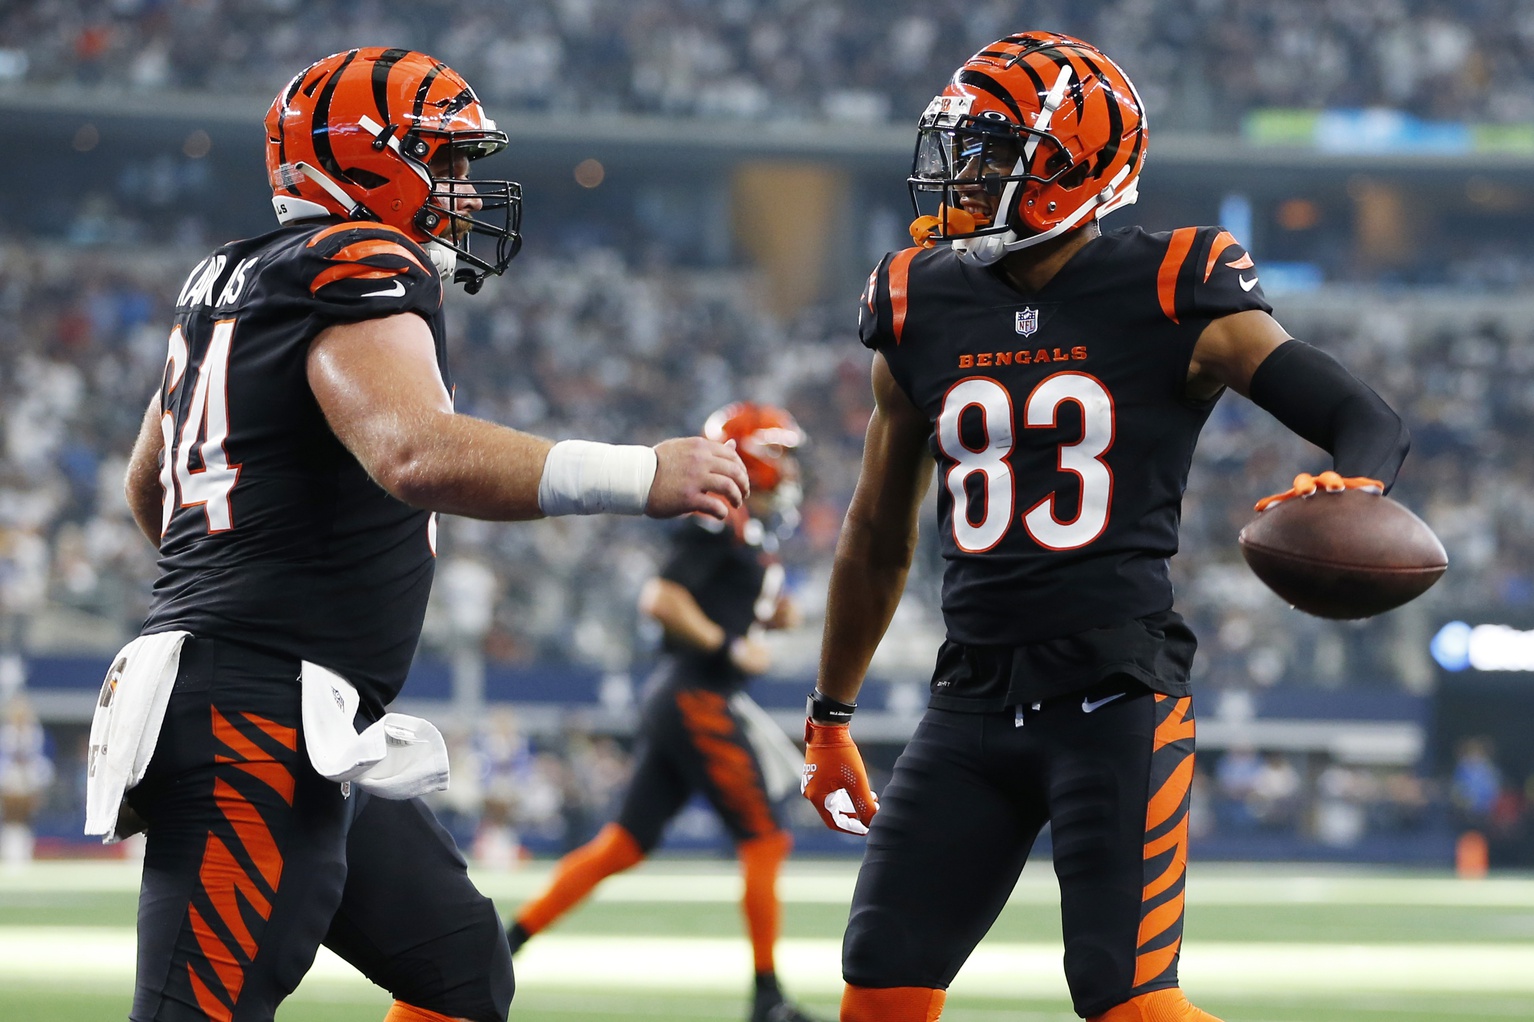 Ravens vs Bengals prop betting picks: Best bets for Sunday's game